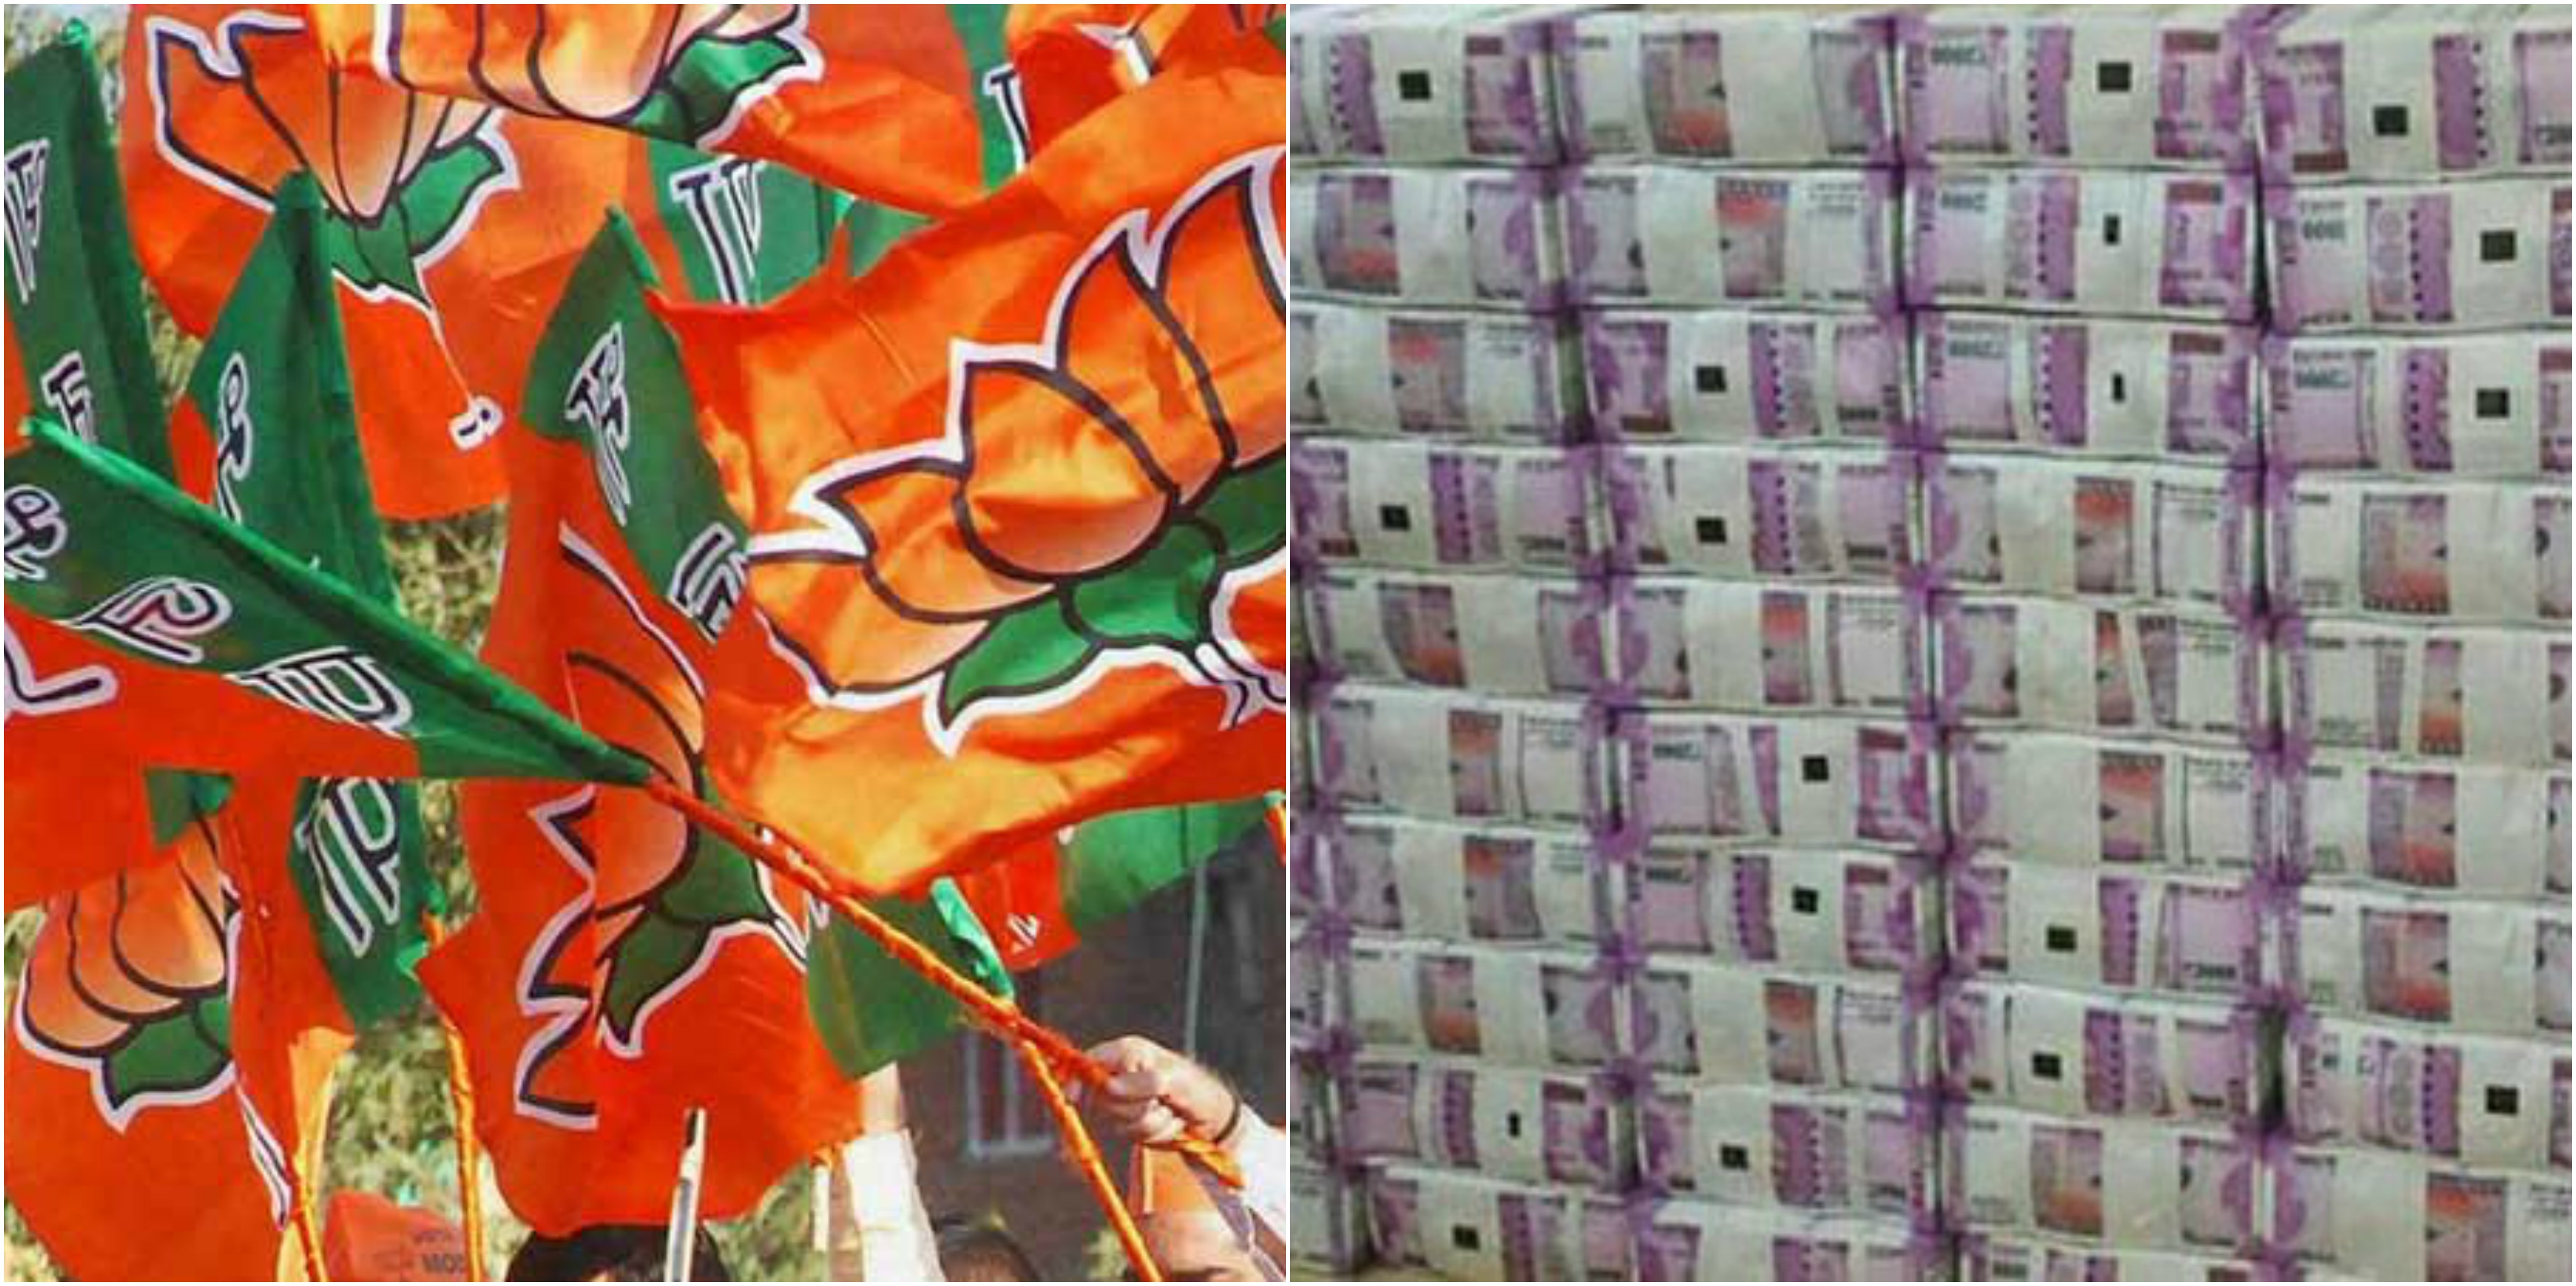 bjp-is-richest-national-party-with-1034-crore-income